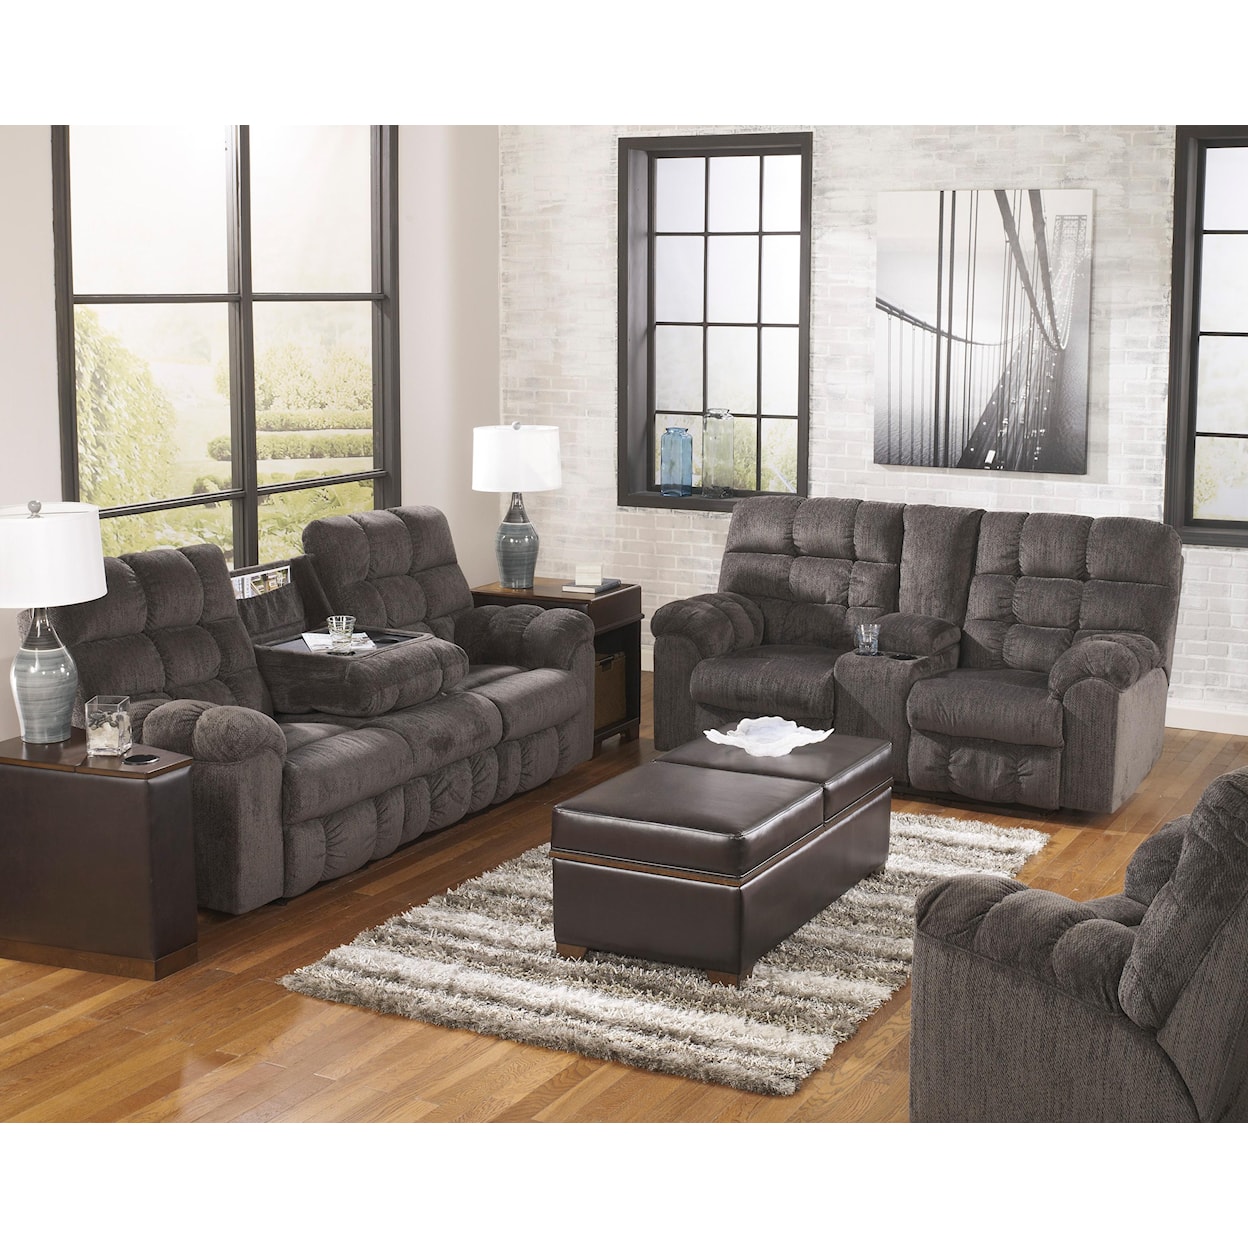 Signature Design by Ashley Furniture Acieona Reclining Living Room Group